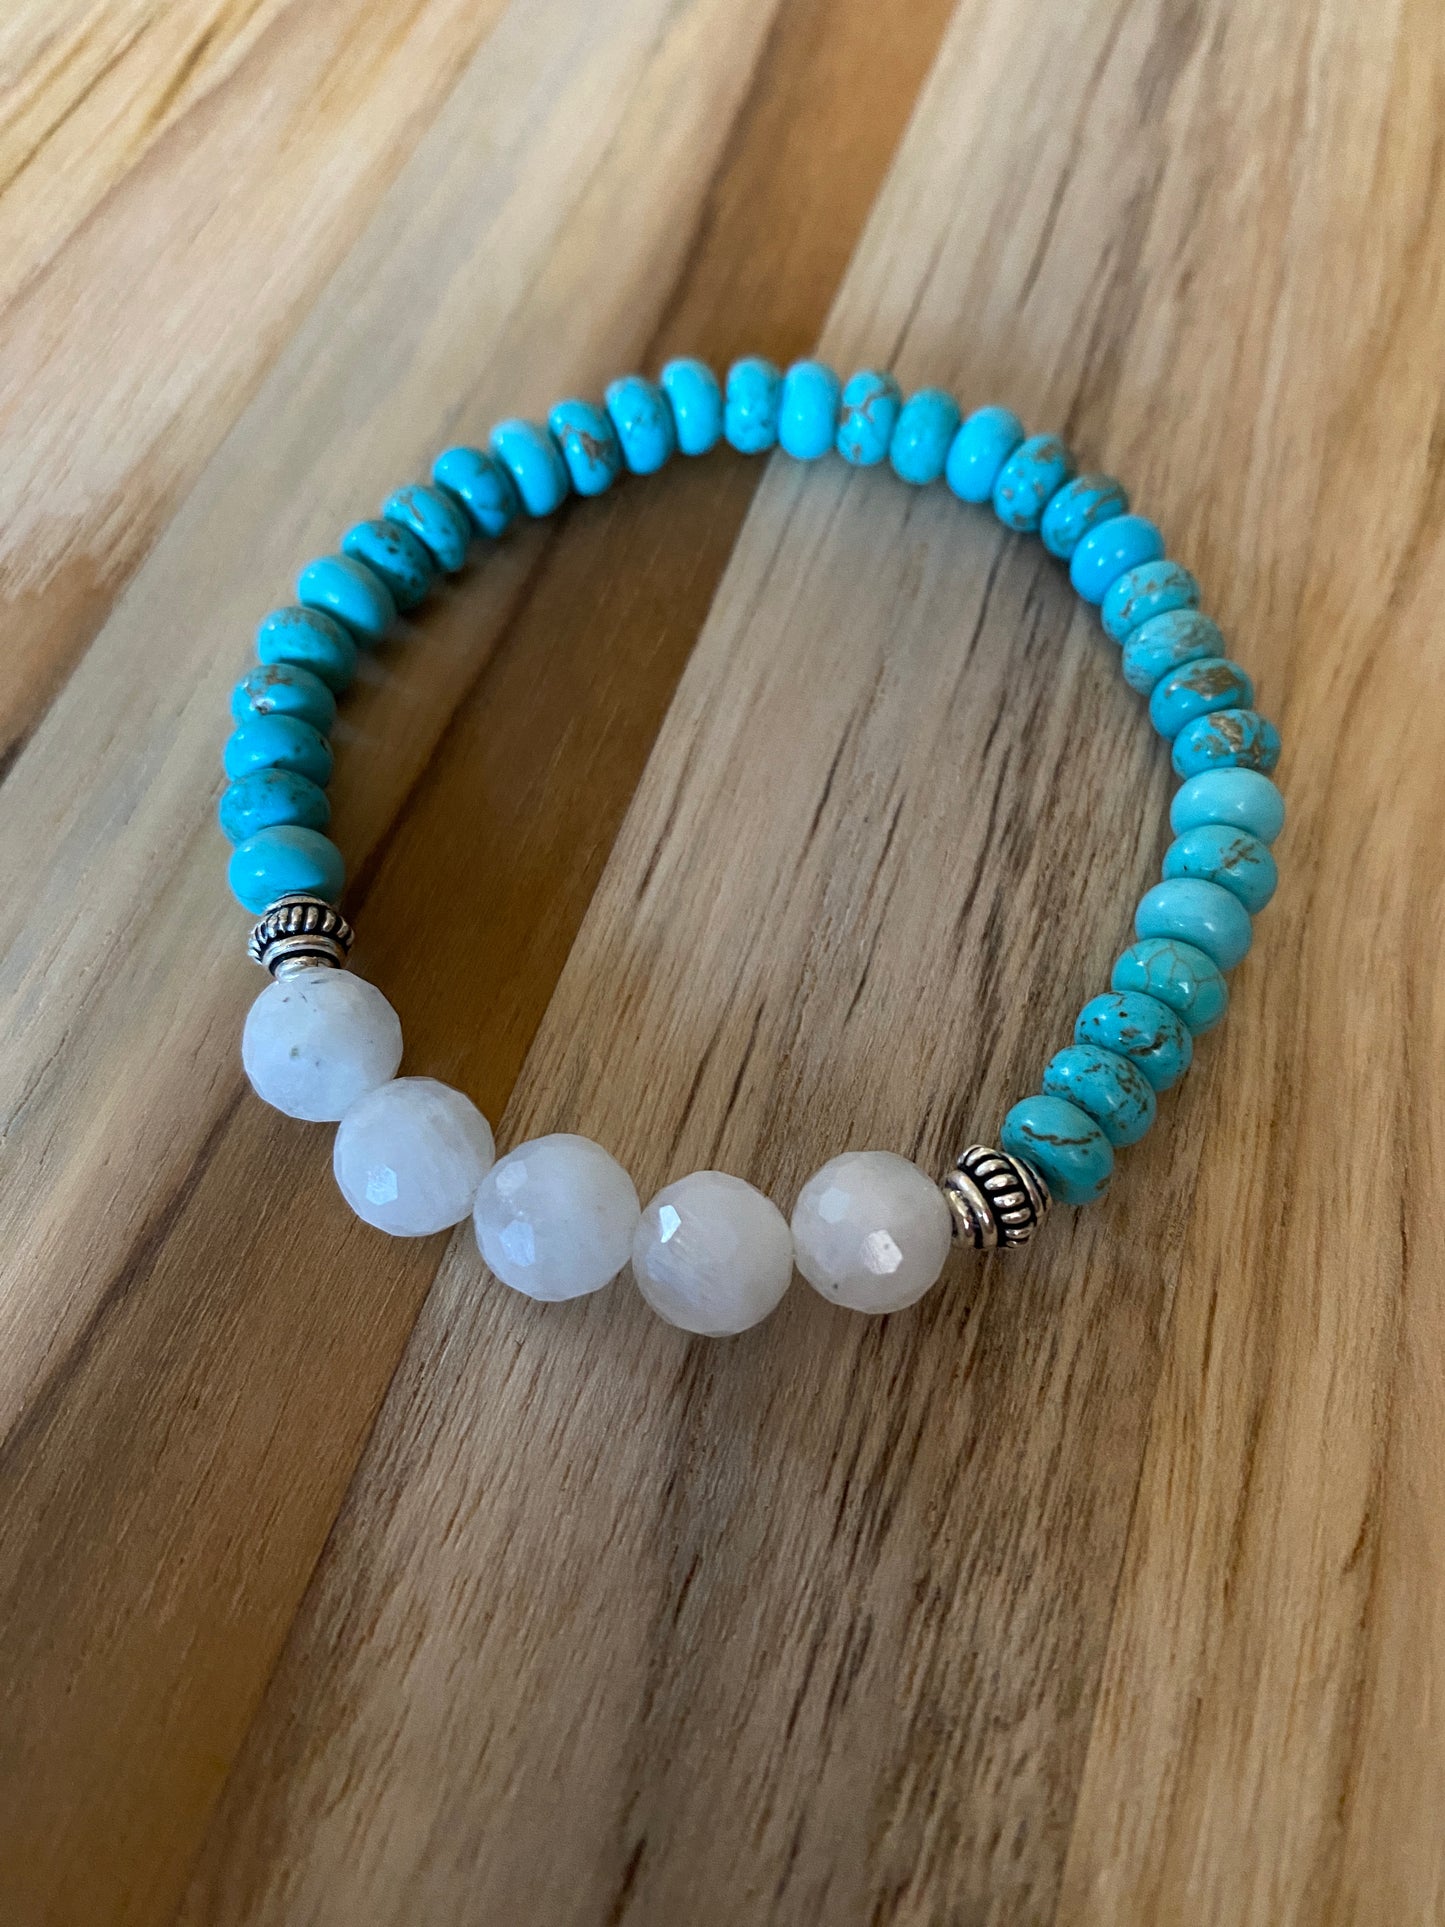 Nevada Blue Turquoise Beaded Stretch Bracelet with Faceted Moonstone Beads